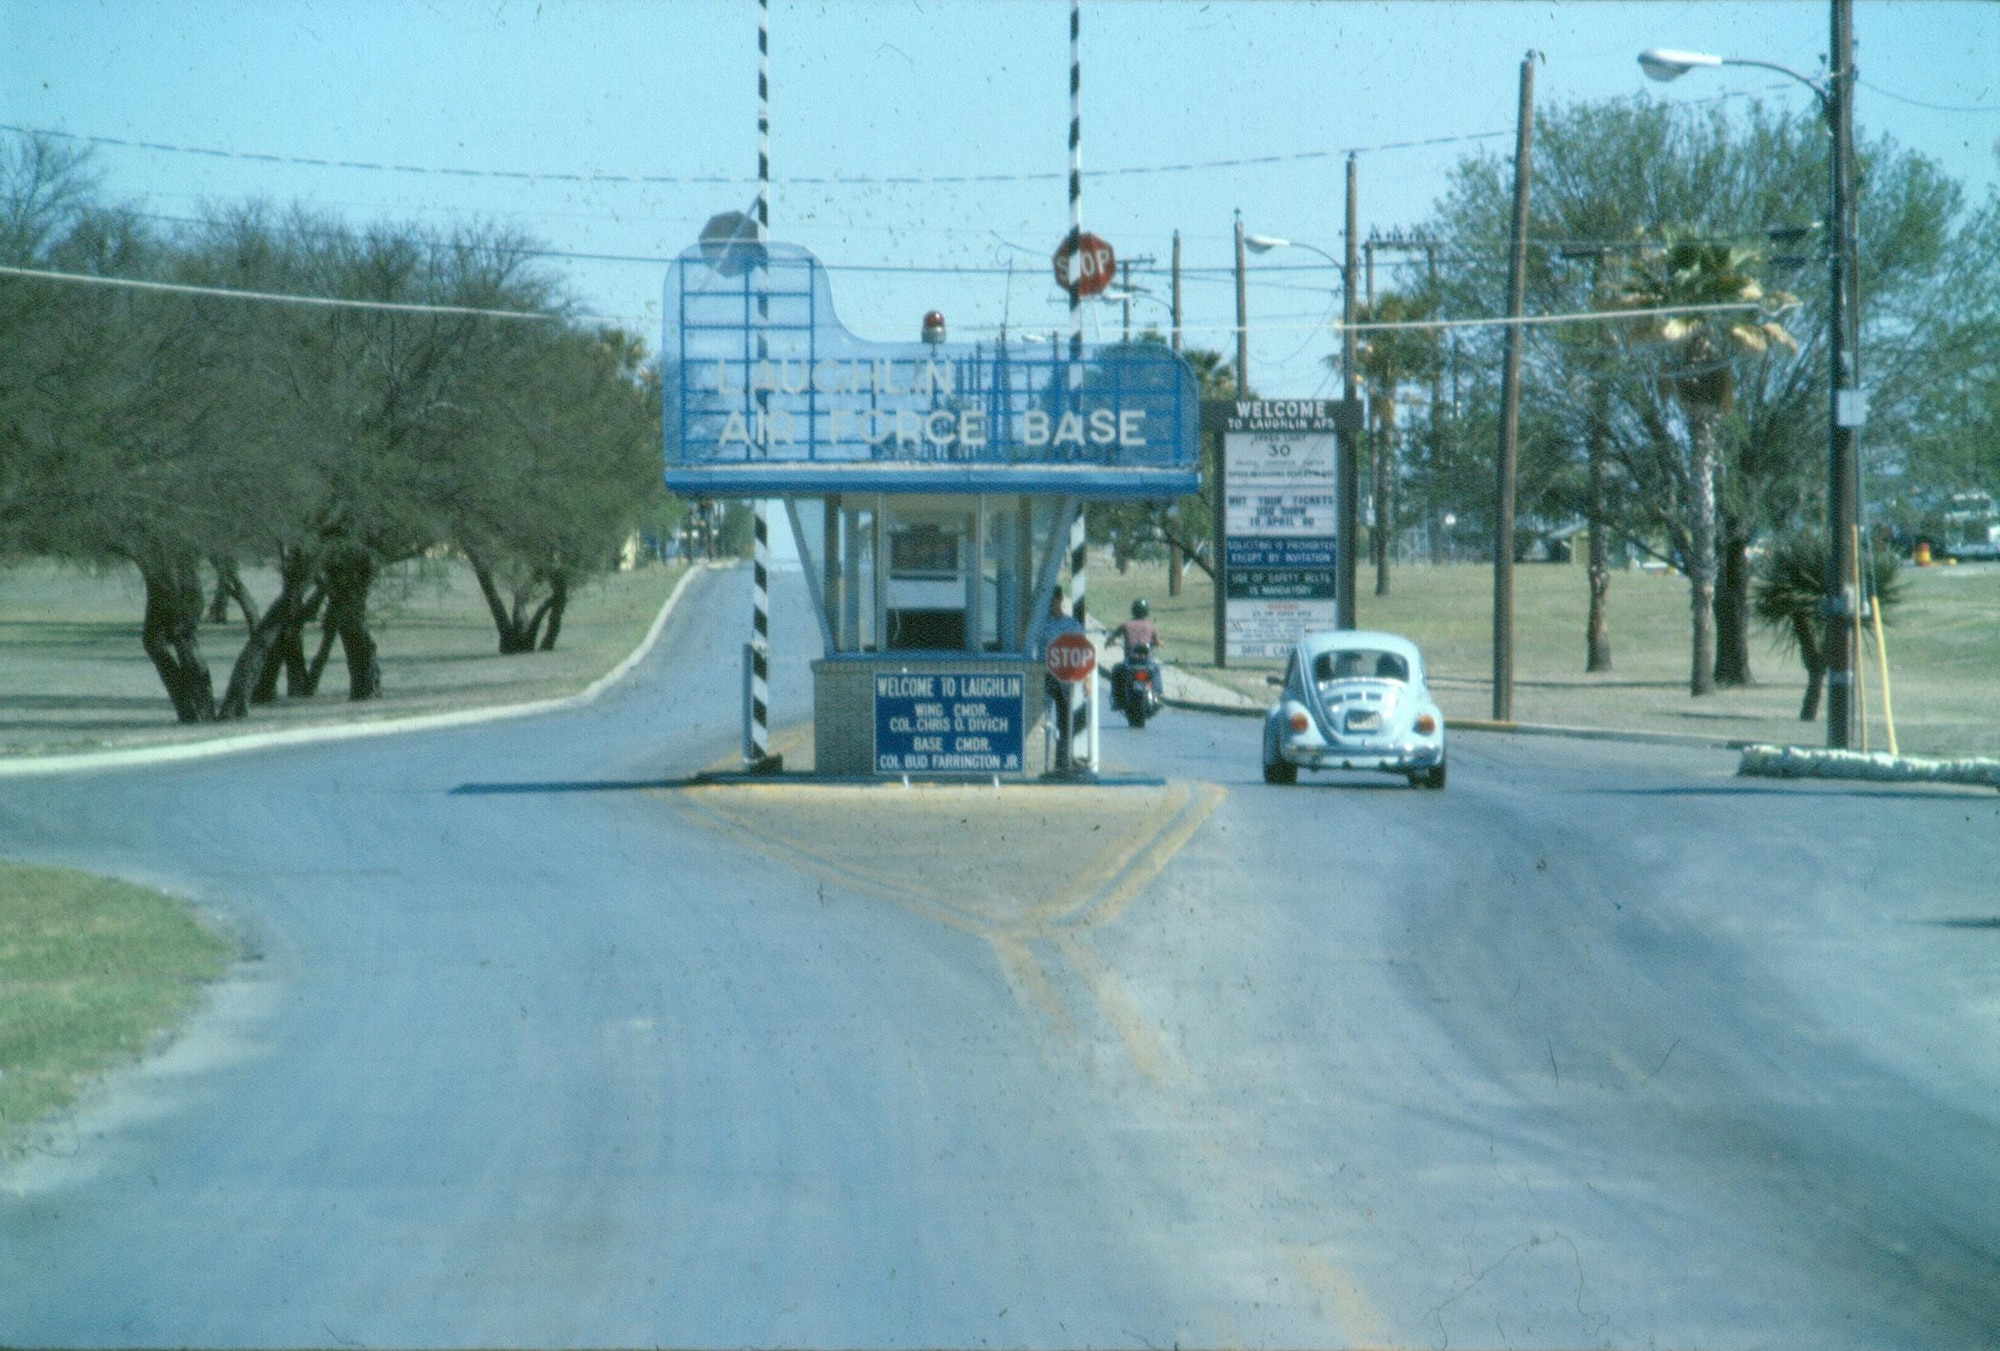 The main gate of Laughlin Air Force Base, Texas, in 1980. (Courtesy photo)